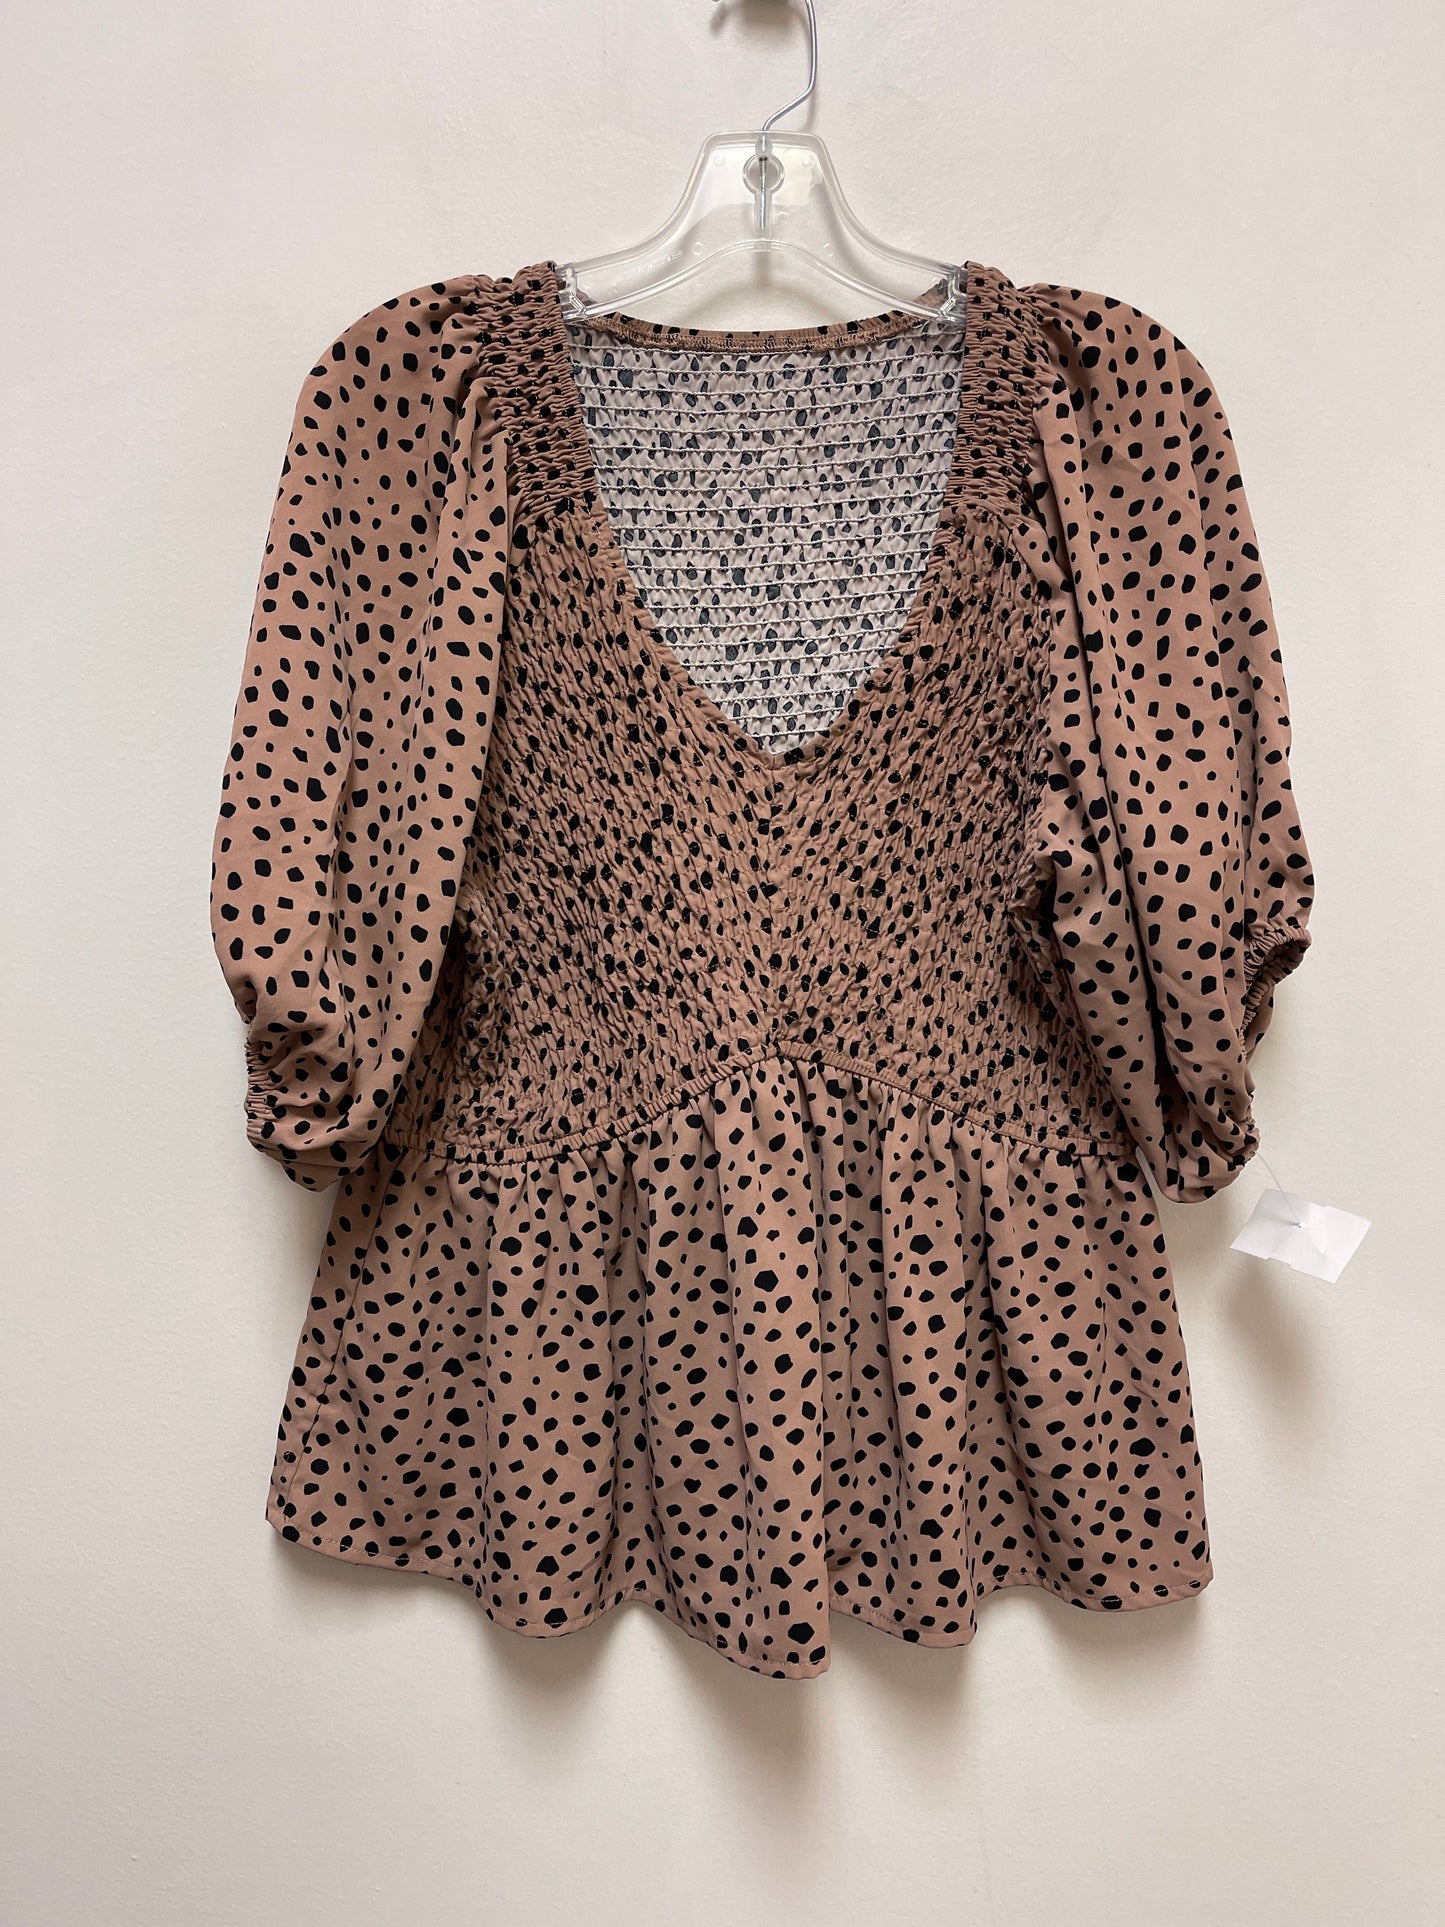 Black & Brown Top Long Sleeve Clothes Mentor, Size Xl